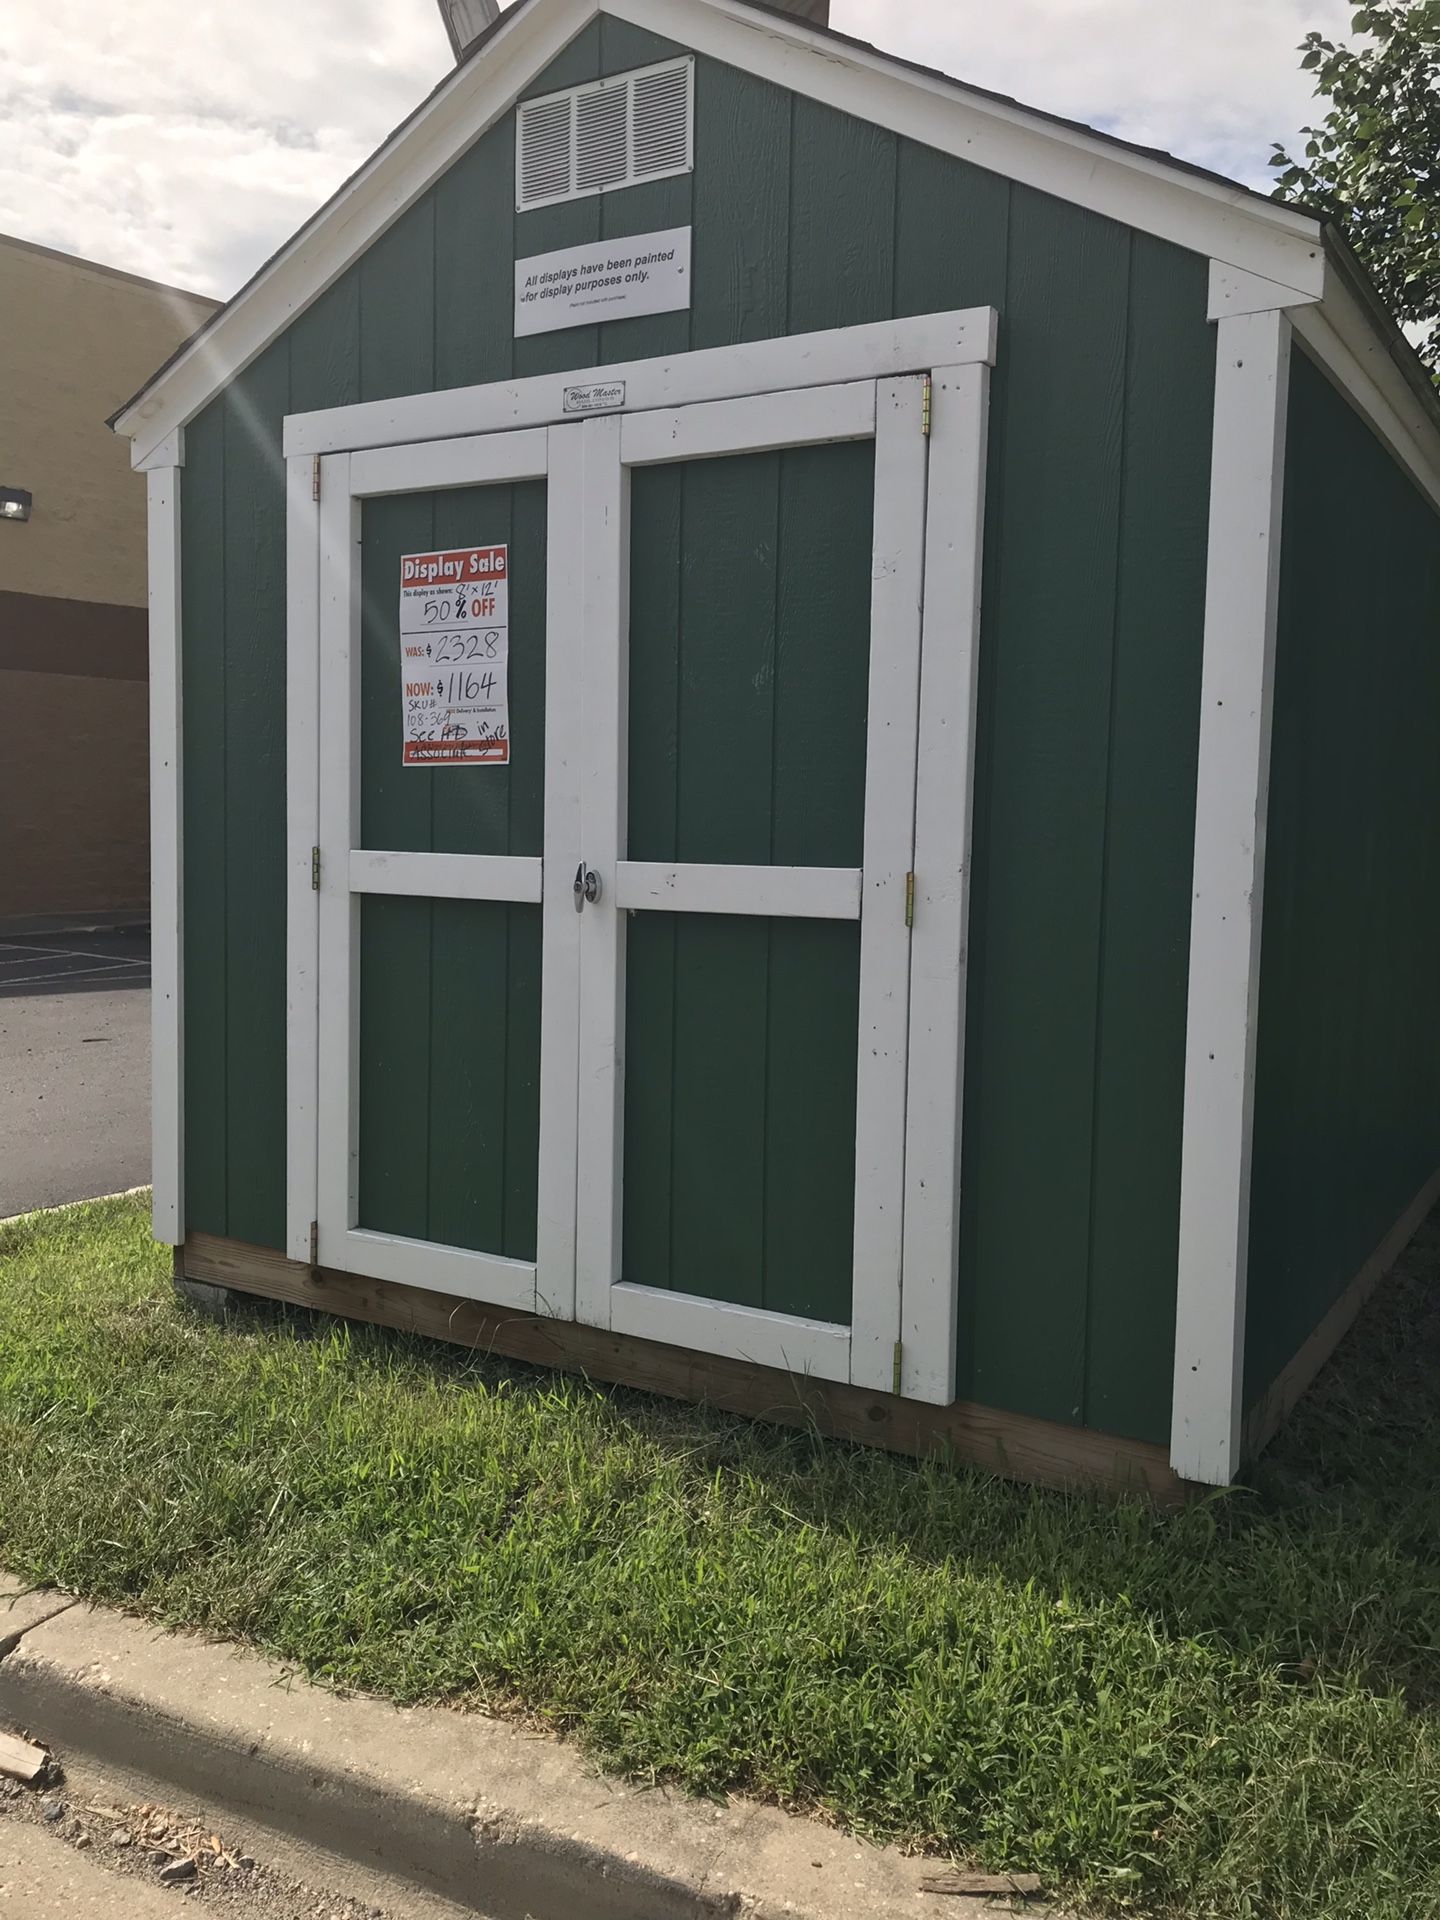 Existing shed display $1164 with delivery setup w/in 30 miles